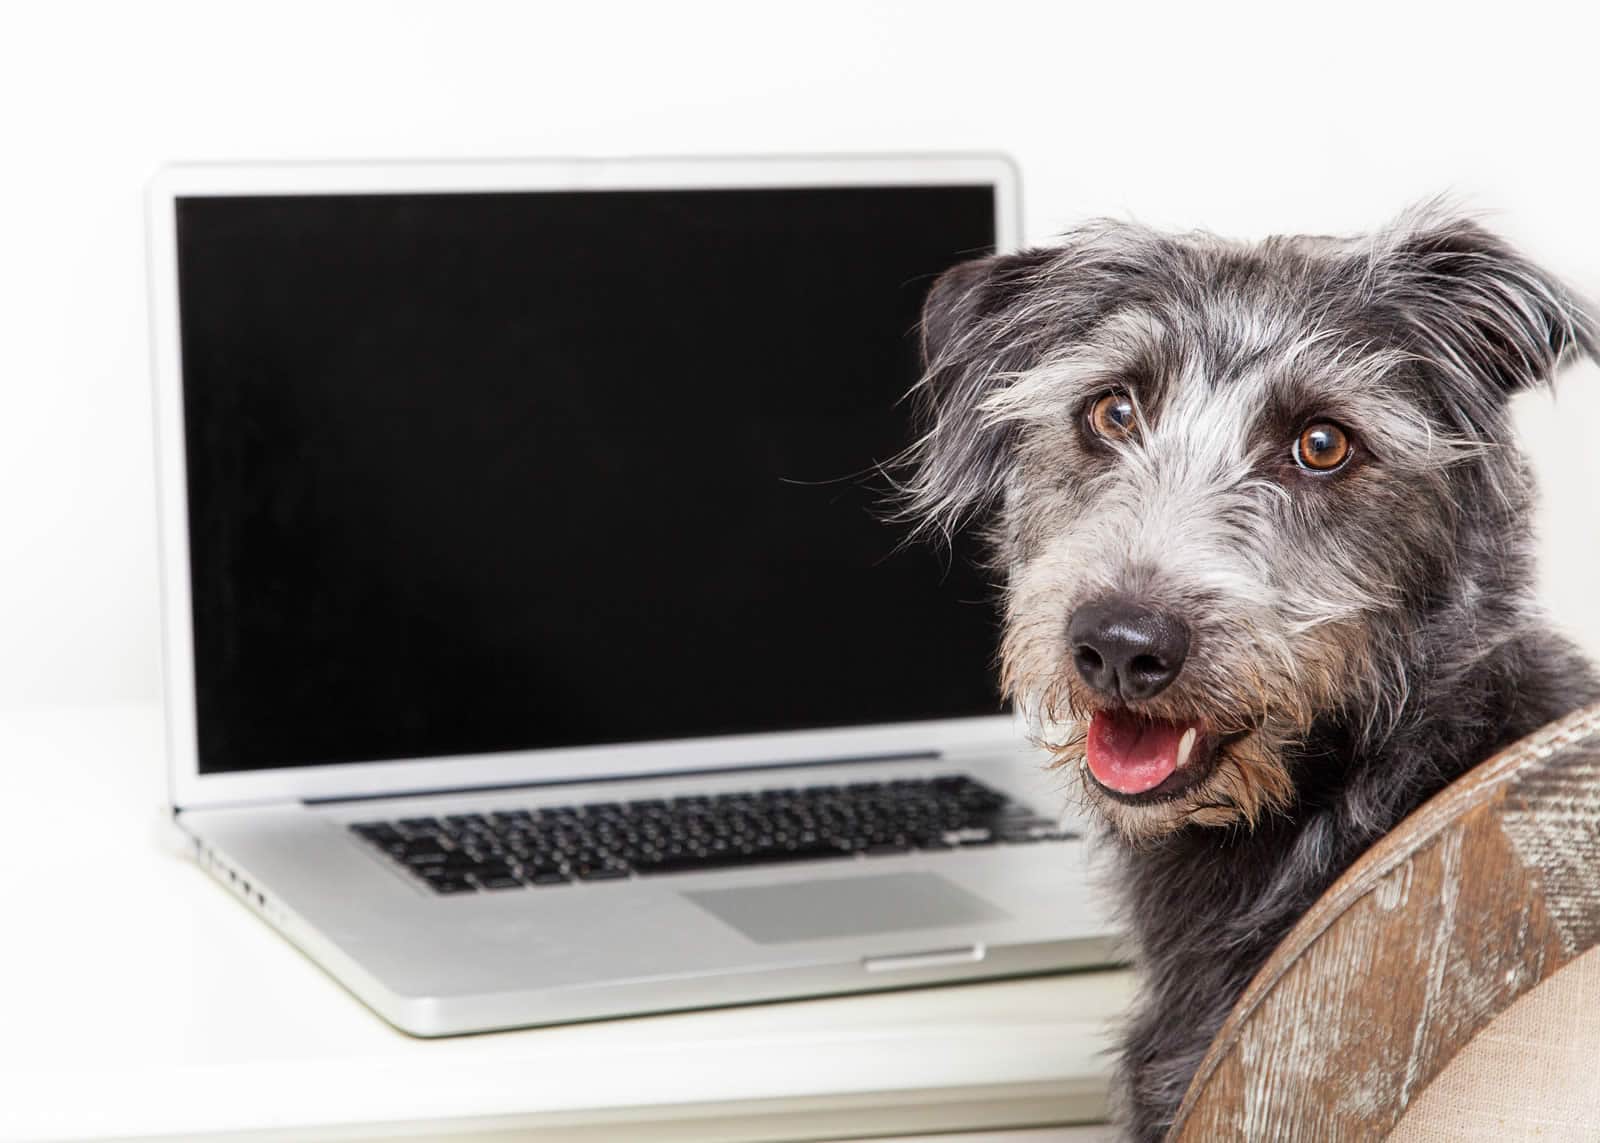 Dog sitting at a desk in front of a laptop computer